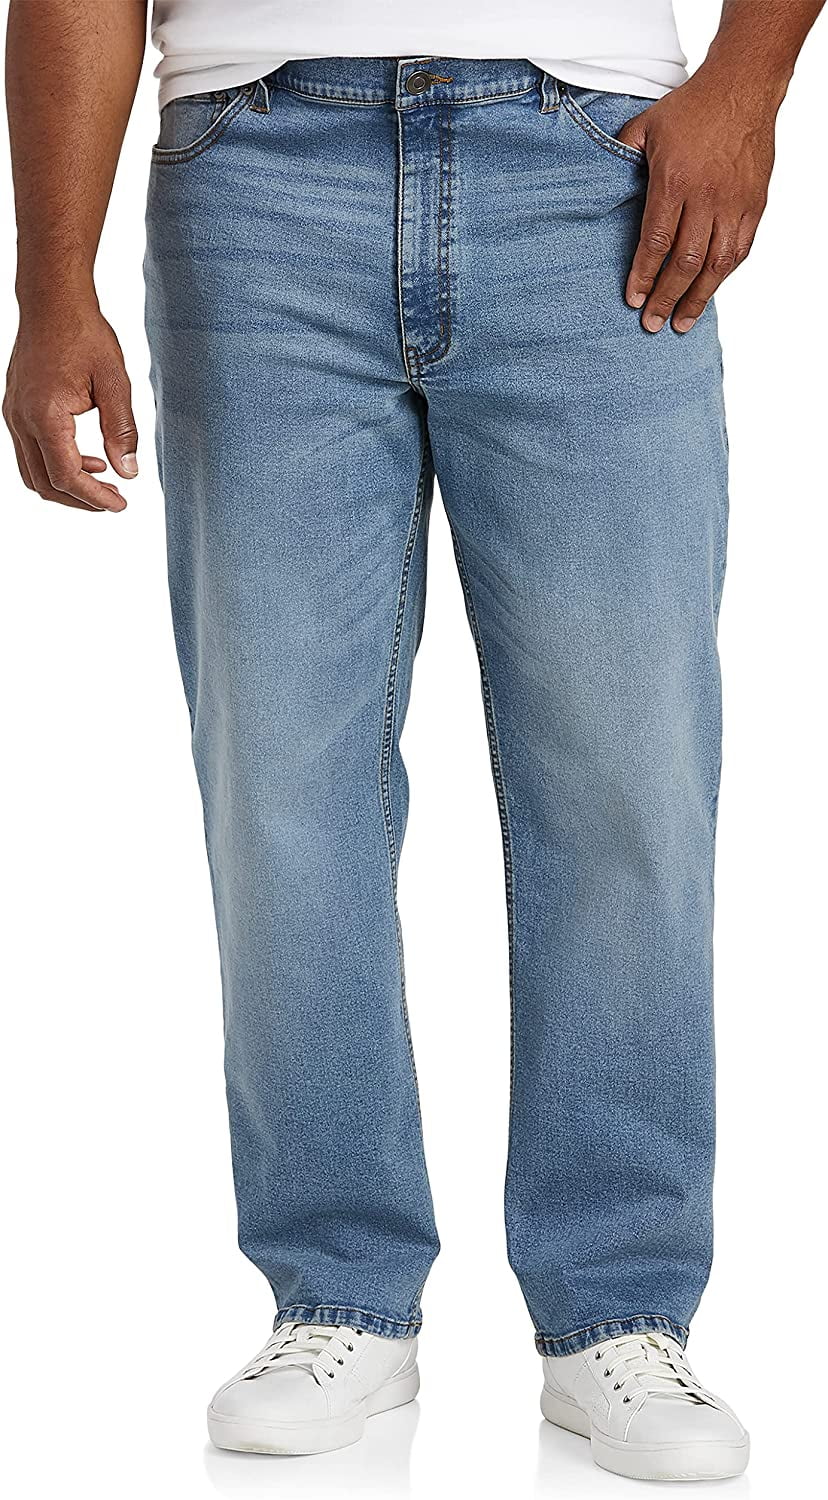 Big and Tall Essentials by DXL Men's Relaxed-Fit Jeans, Light Wash, 48W ...